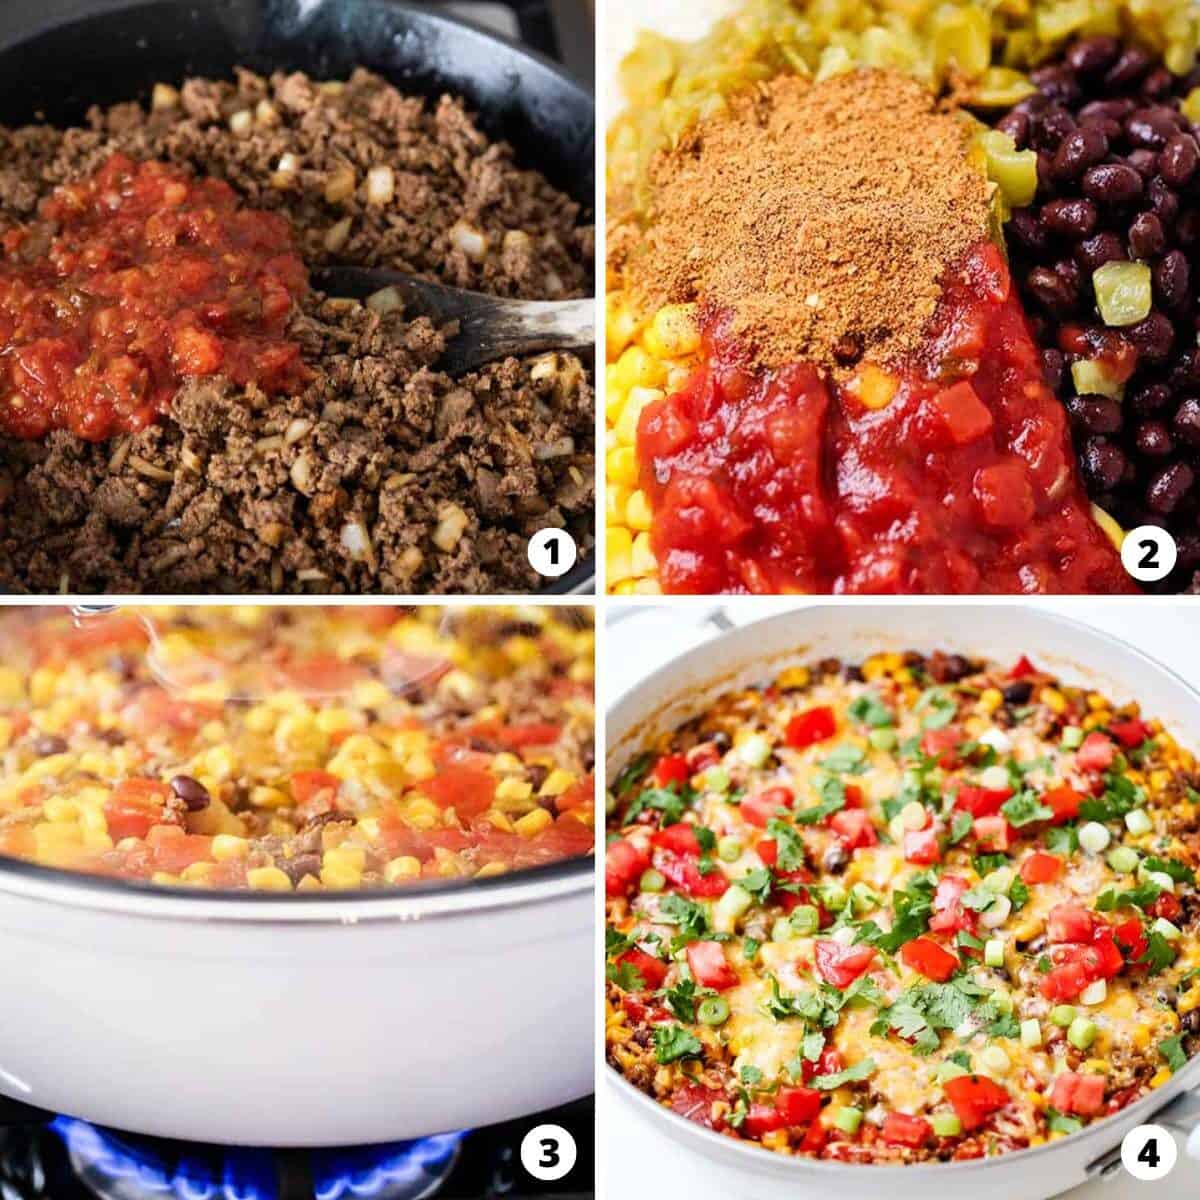 Showing how to make burrito bowls in a 4 step collage. 